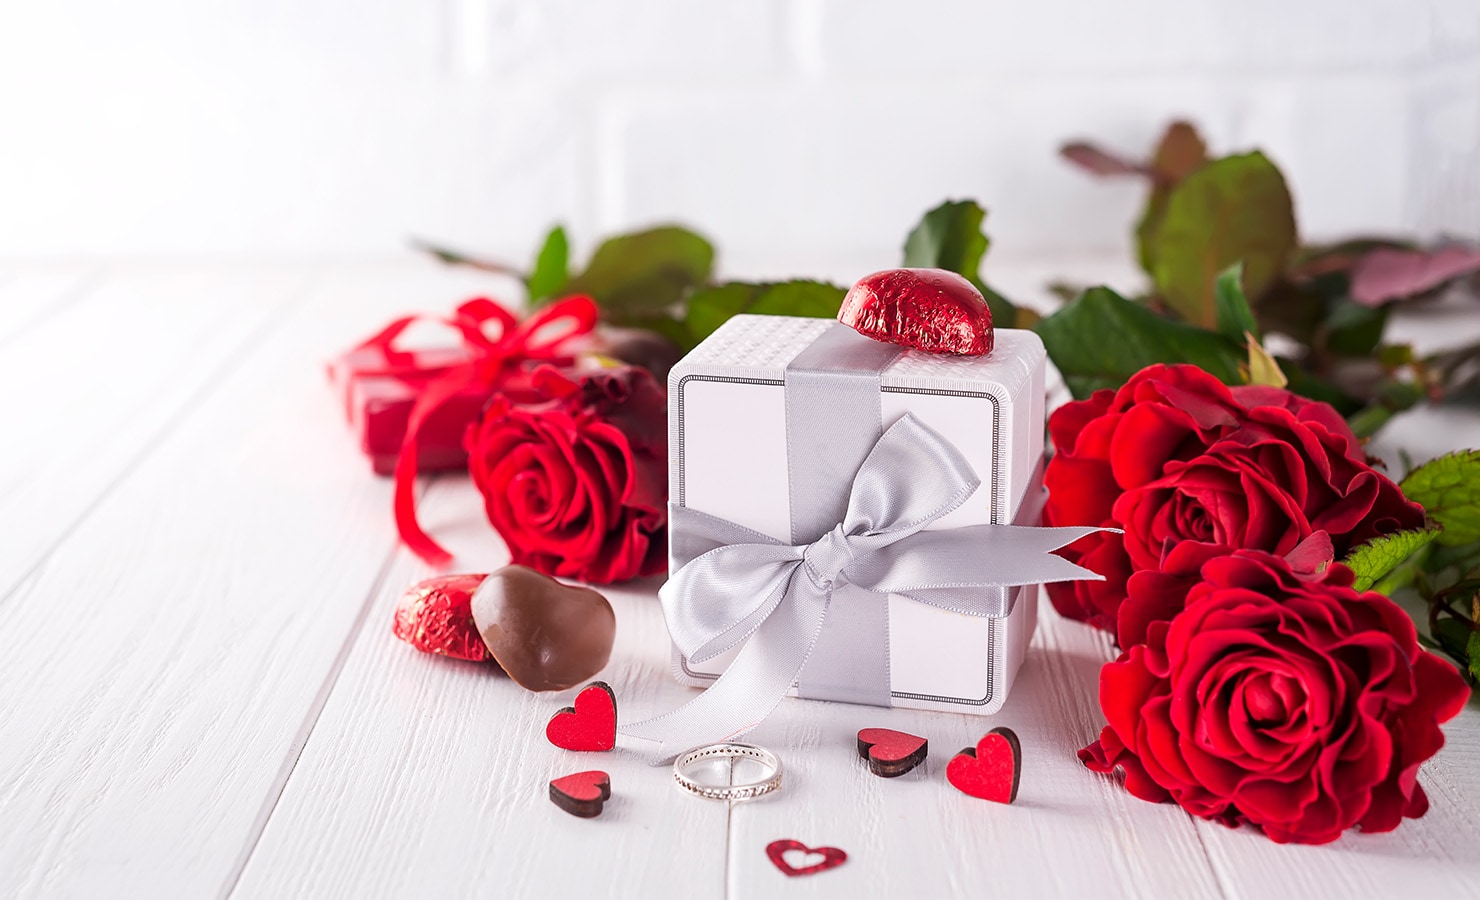 7 Valentine's Day gift ideas in Malaysia (2018)